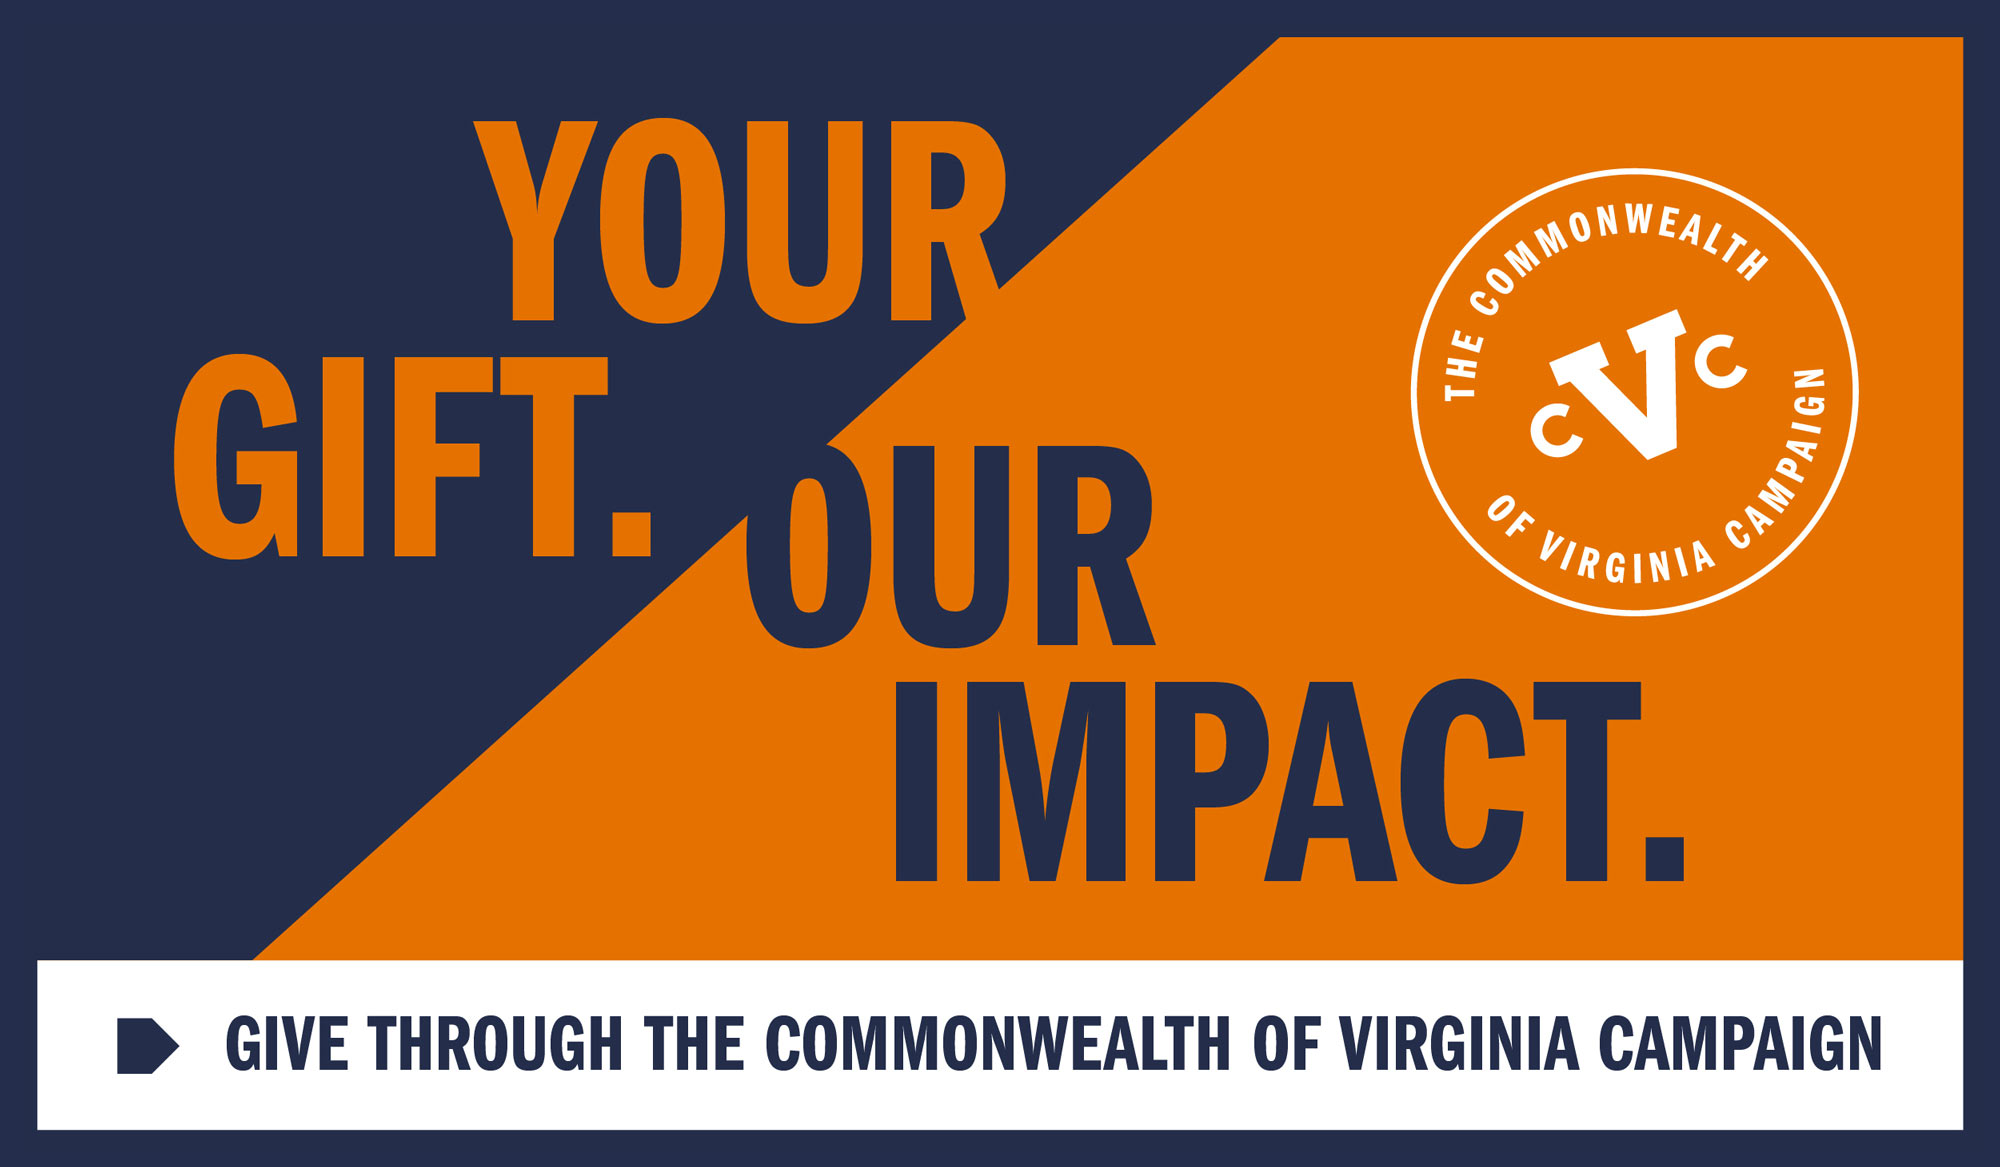 Your gift. Our impact. Give through the Commonwealth of Virginia Campaign.